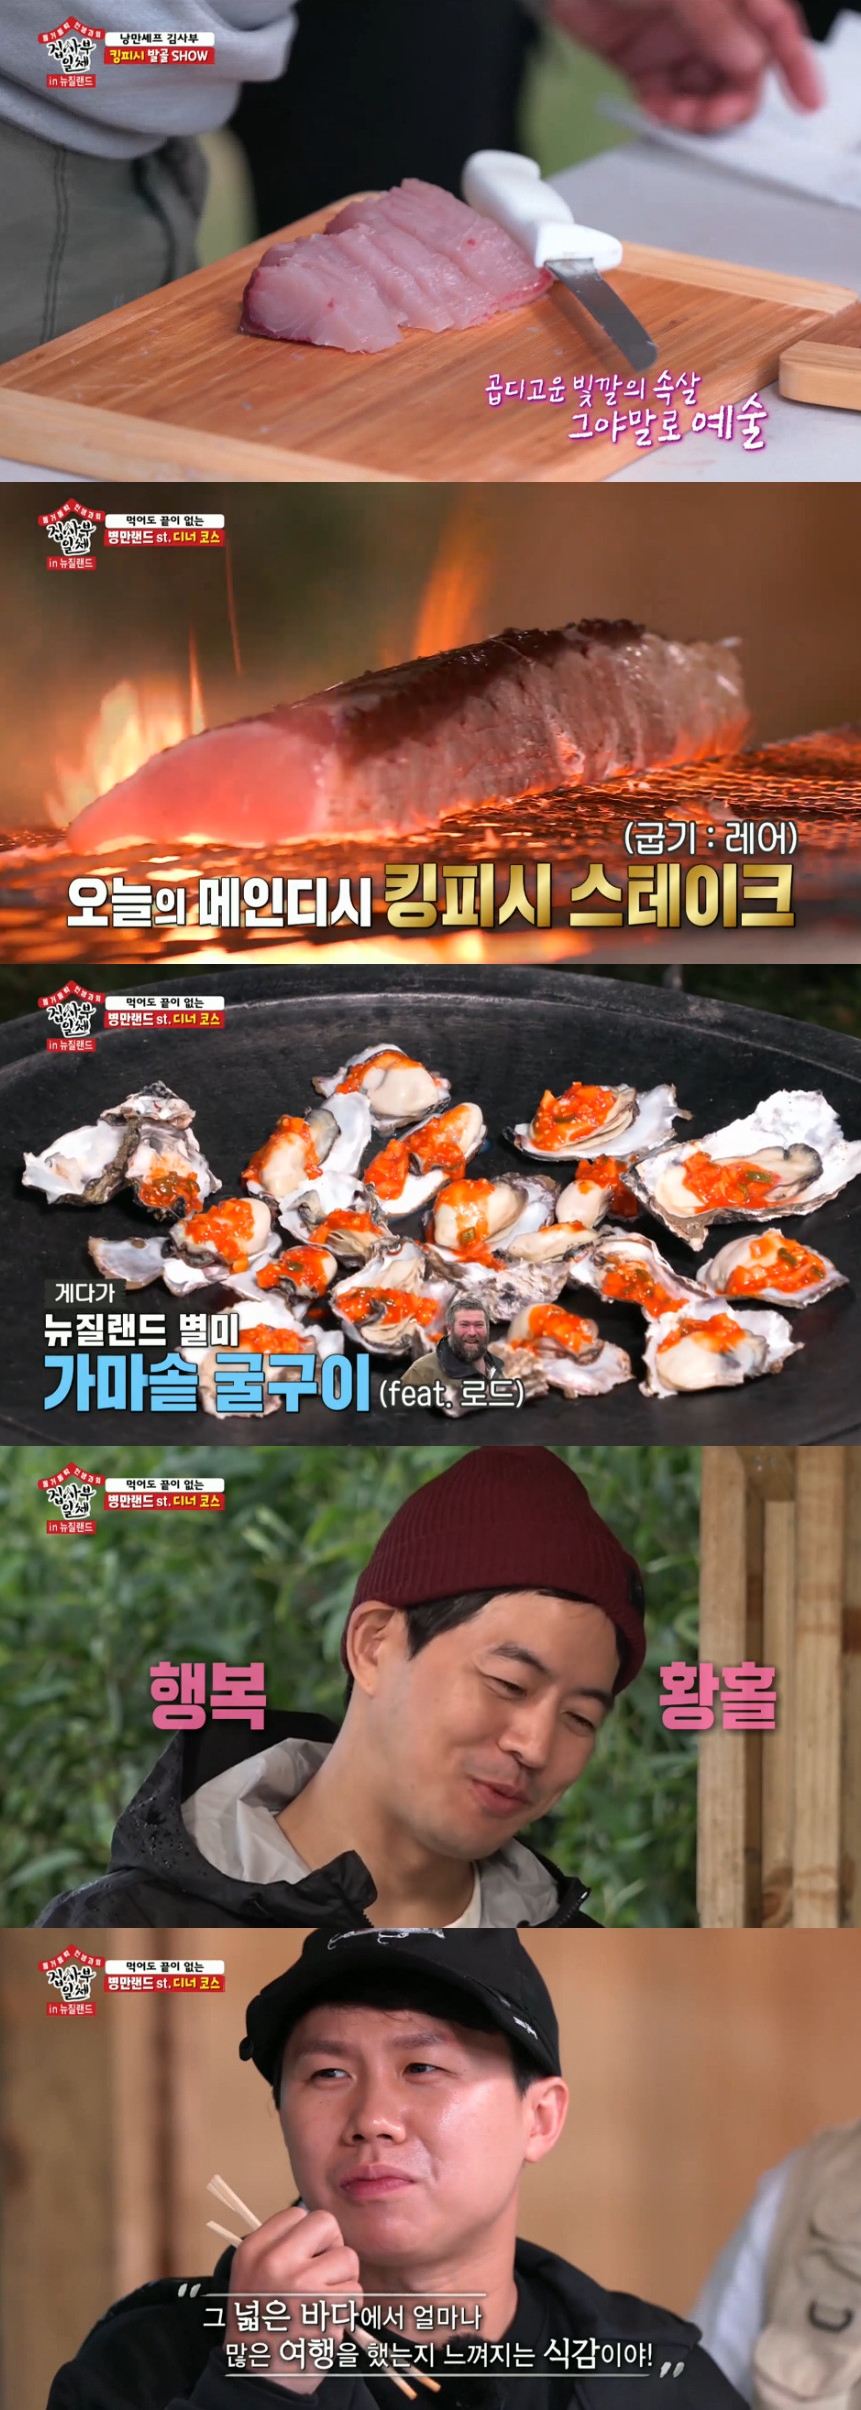 Comedian Kim Byung-man has also done a kingfish job.Kim Byung-man appeared as a master on SBS All The Butlers broadcast on December 22, and presented Kingfish Society and Kingfish Steak to the rising figure in New Zealand.Lee Seung-gi, who sampled it, admired it as exorbitant, and Lee Sang-yoon, who caught the Kingfish himself, savored the sashimi and made a smile.I think it just sticks to the corner from the mouth, I think I know why its so powerful when I eat it, Lee Sang-yoon said.Isnt he dead yet? said Yoo Seong-jae, laughing at her extraordinary chewiness. This is really delicious. It seems to be much more delicious than a really expensive sushi restaurant.Lee Seung-gi praised it as a lot more.hwang hye-jin